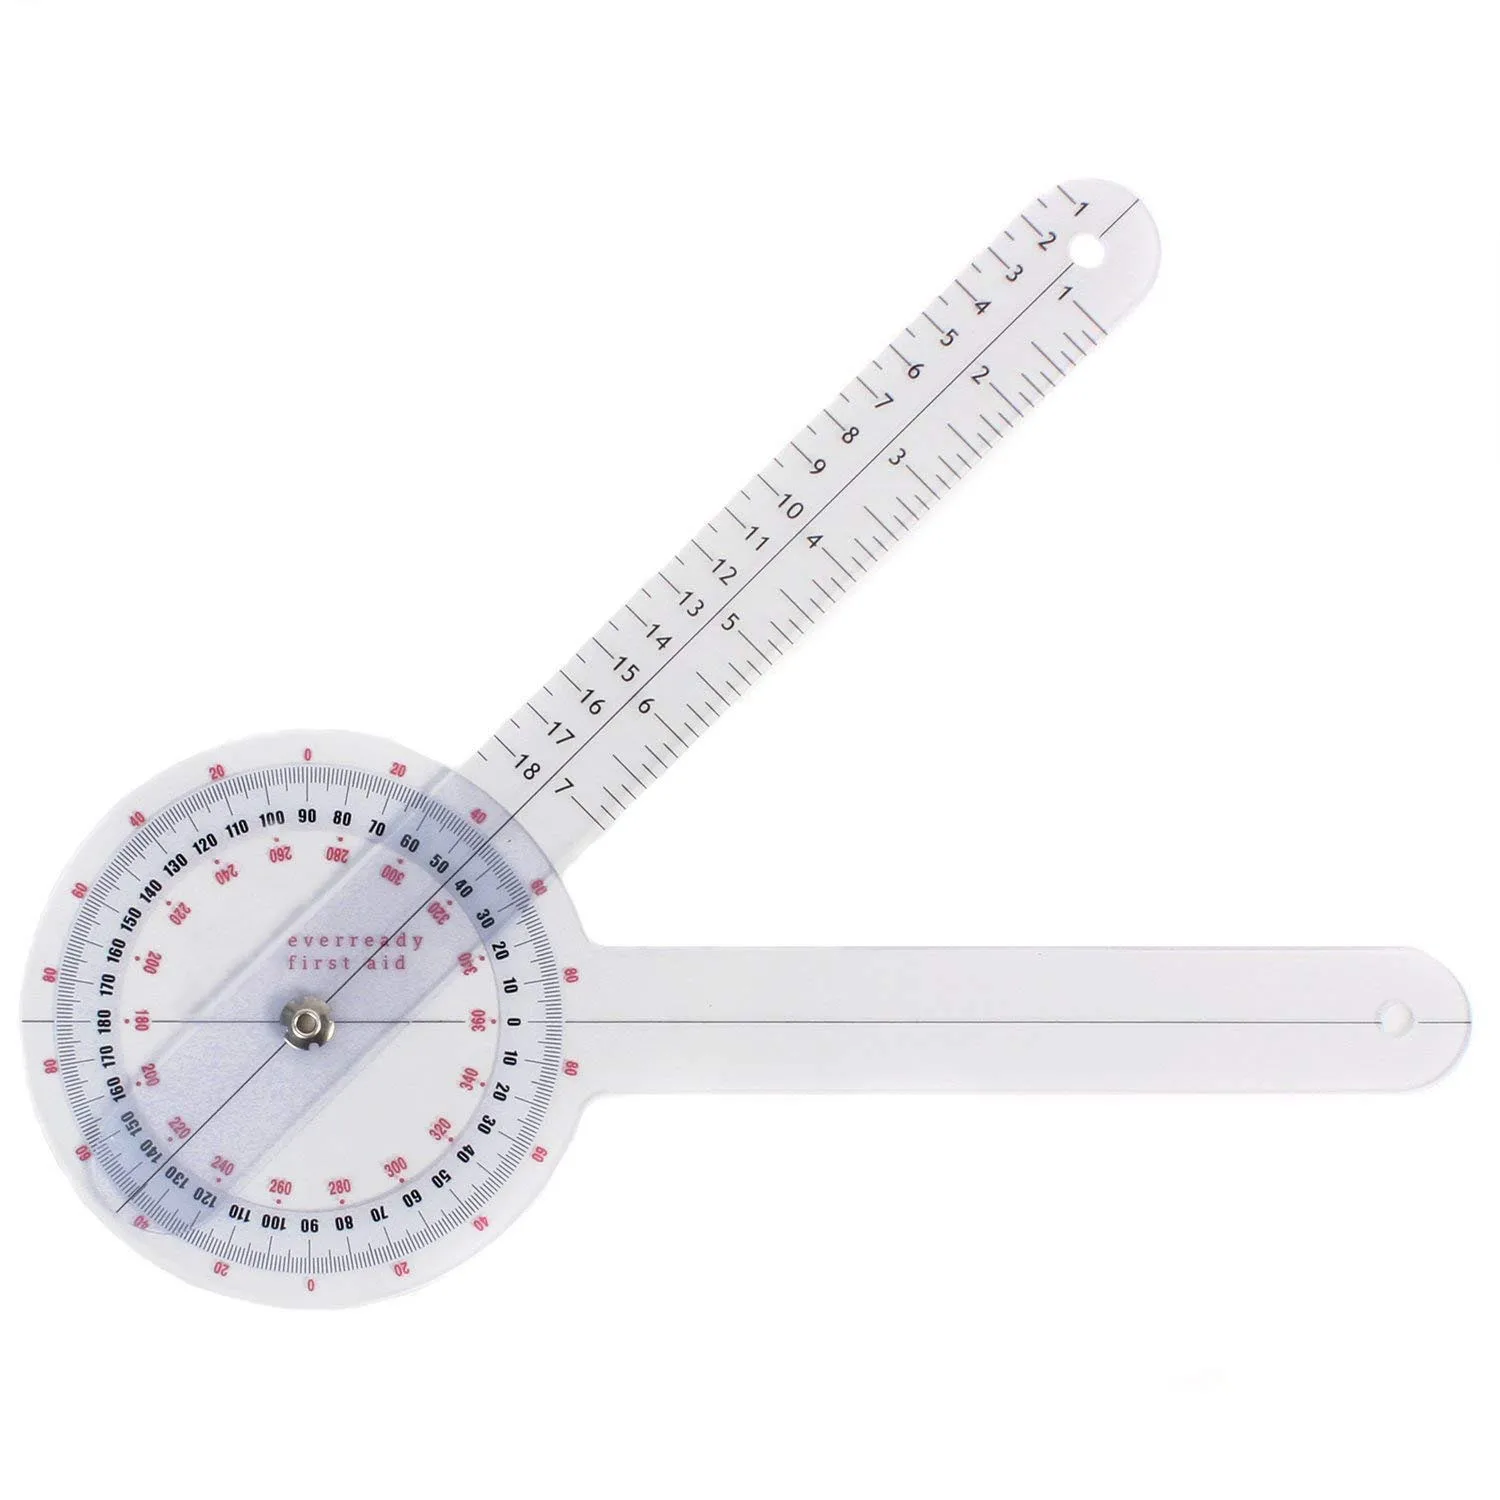 NAYY Practical Goniometer Joint Ruler Calibrated Orthopedics Angle Rule 13inch 33cm Ruler Tools 